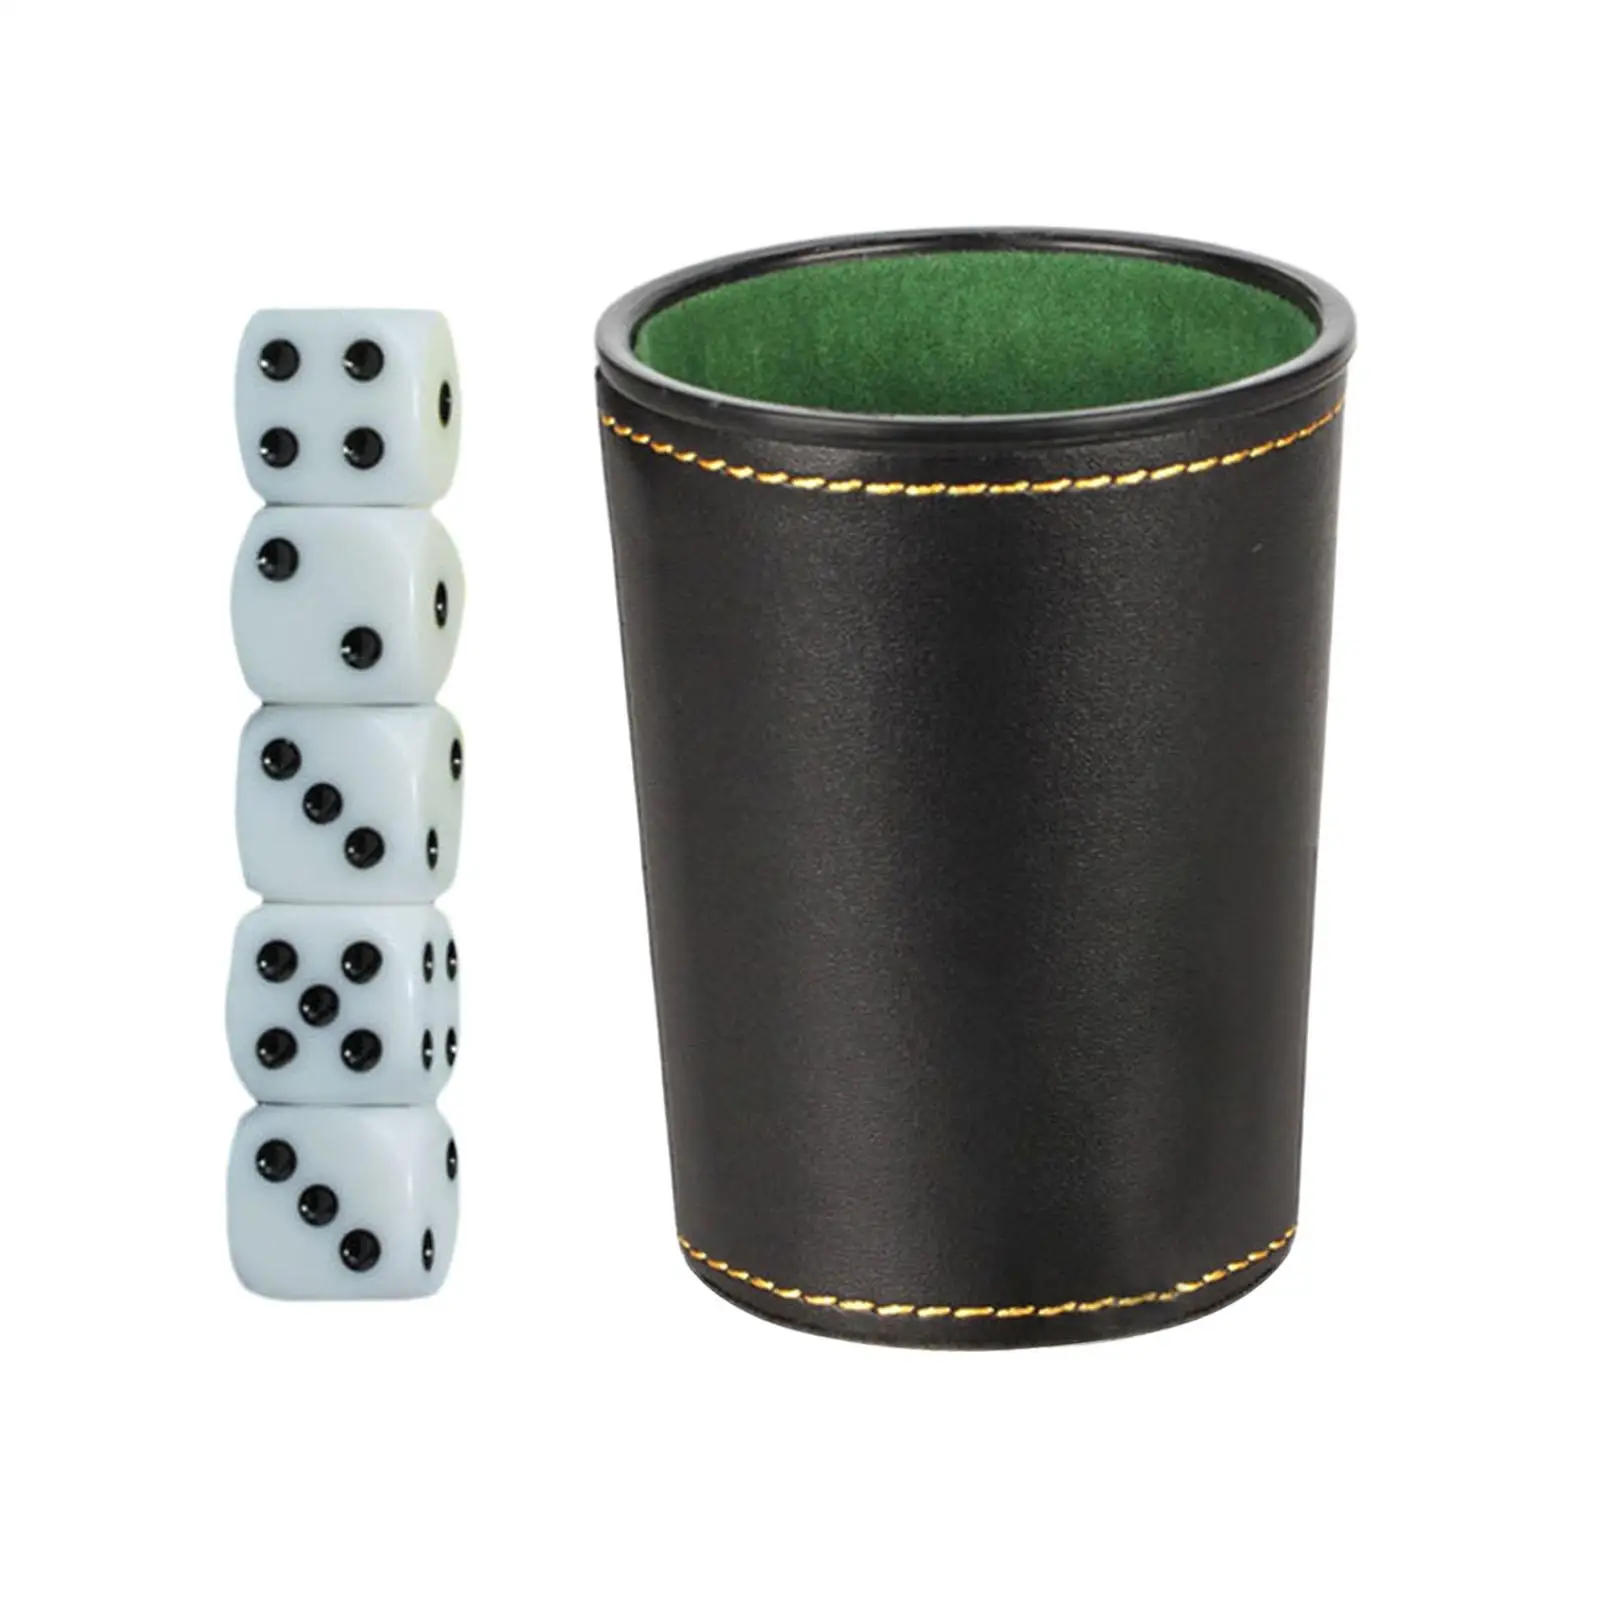 Professional  , W/ 5 s PU Leather for Table Games Party Indoor Entertainment